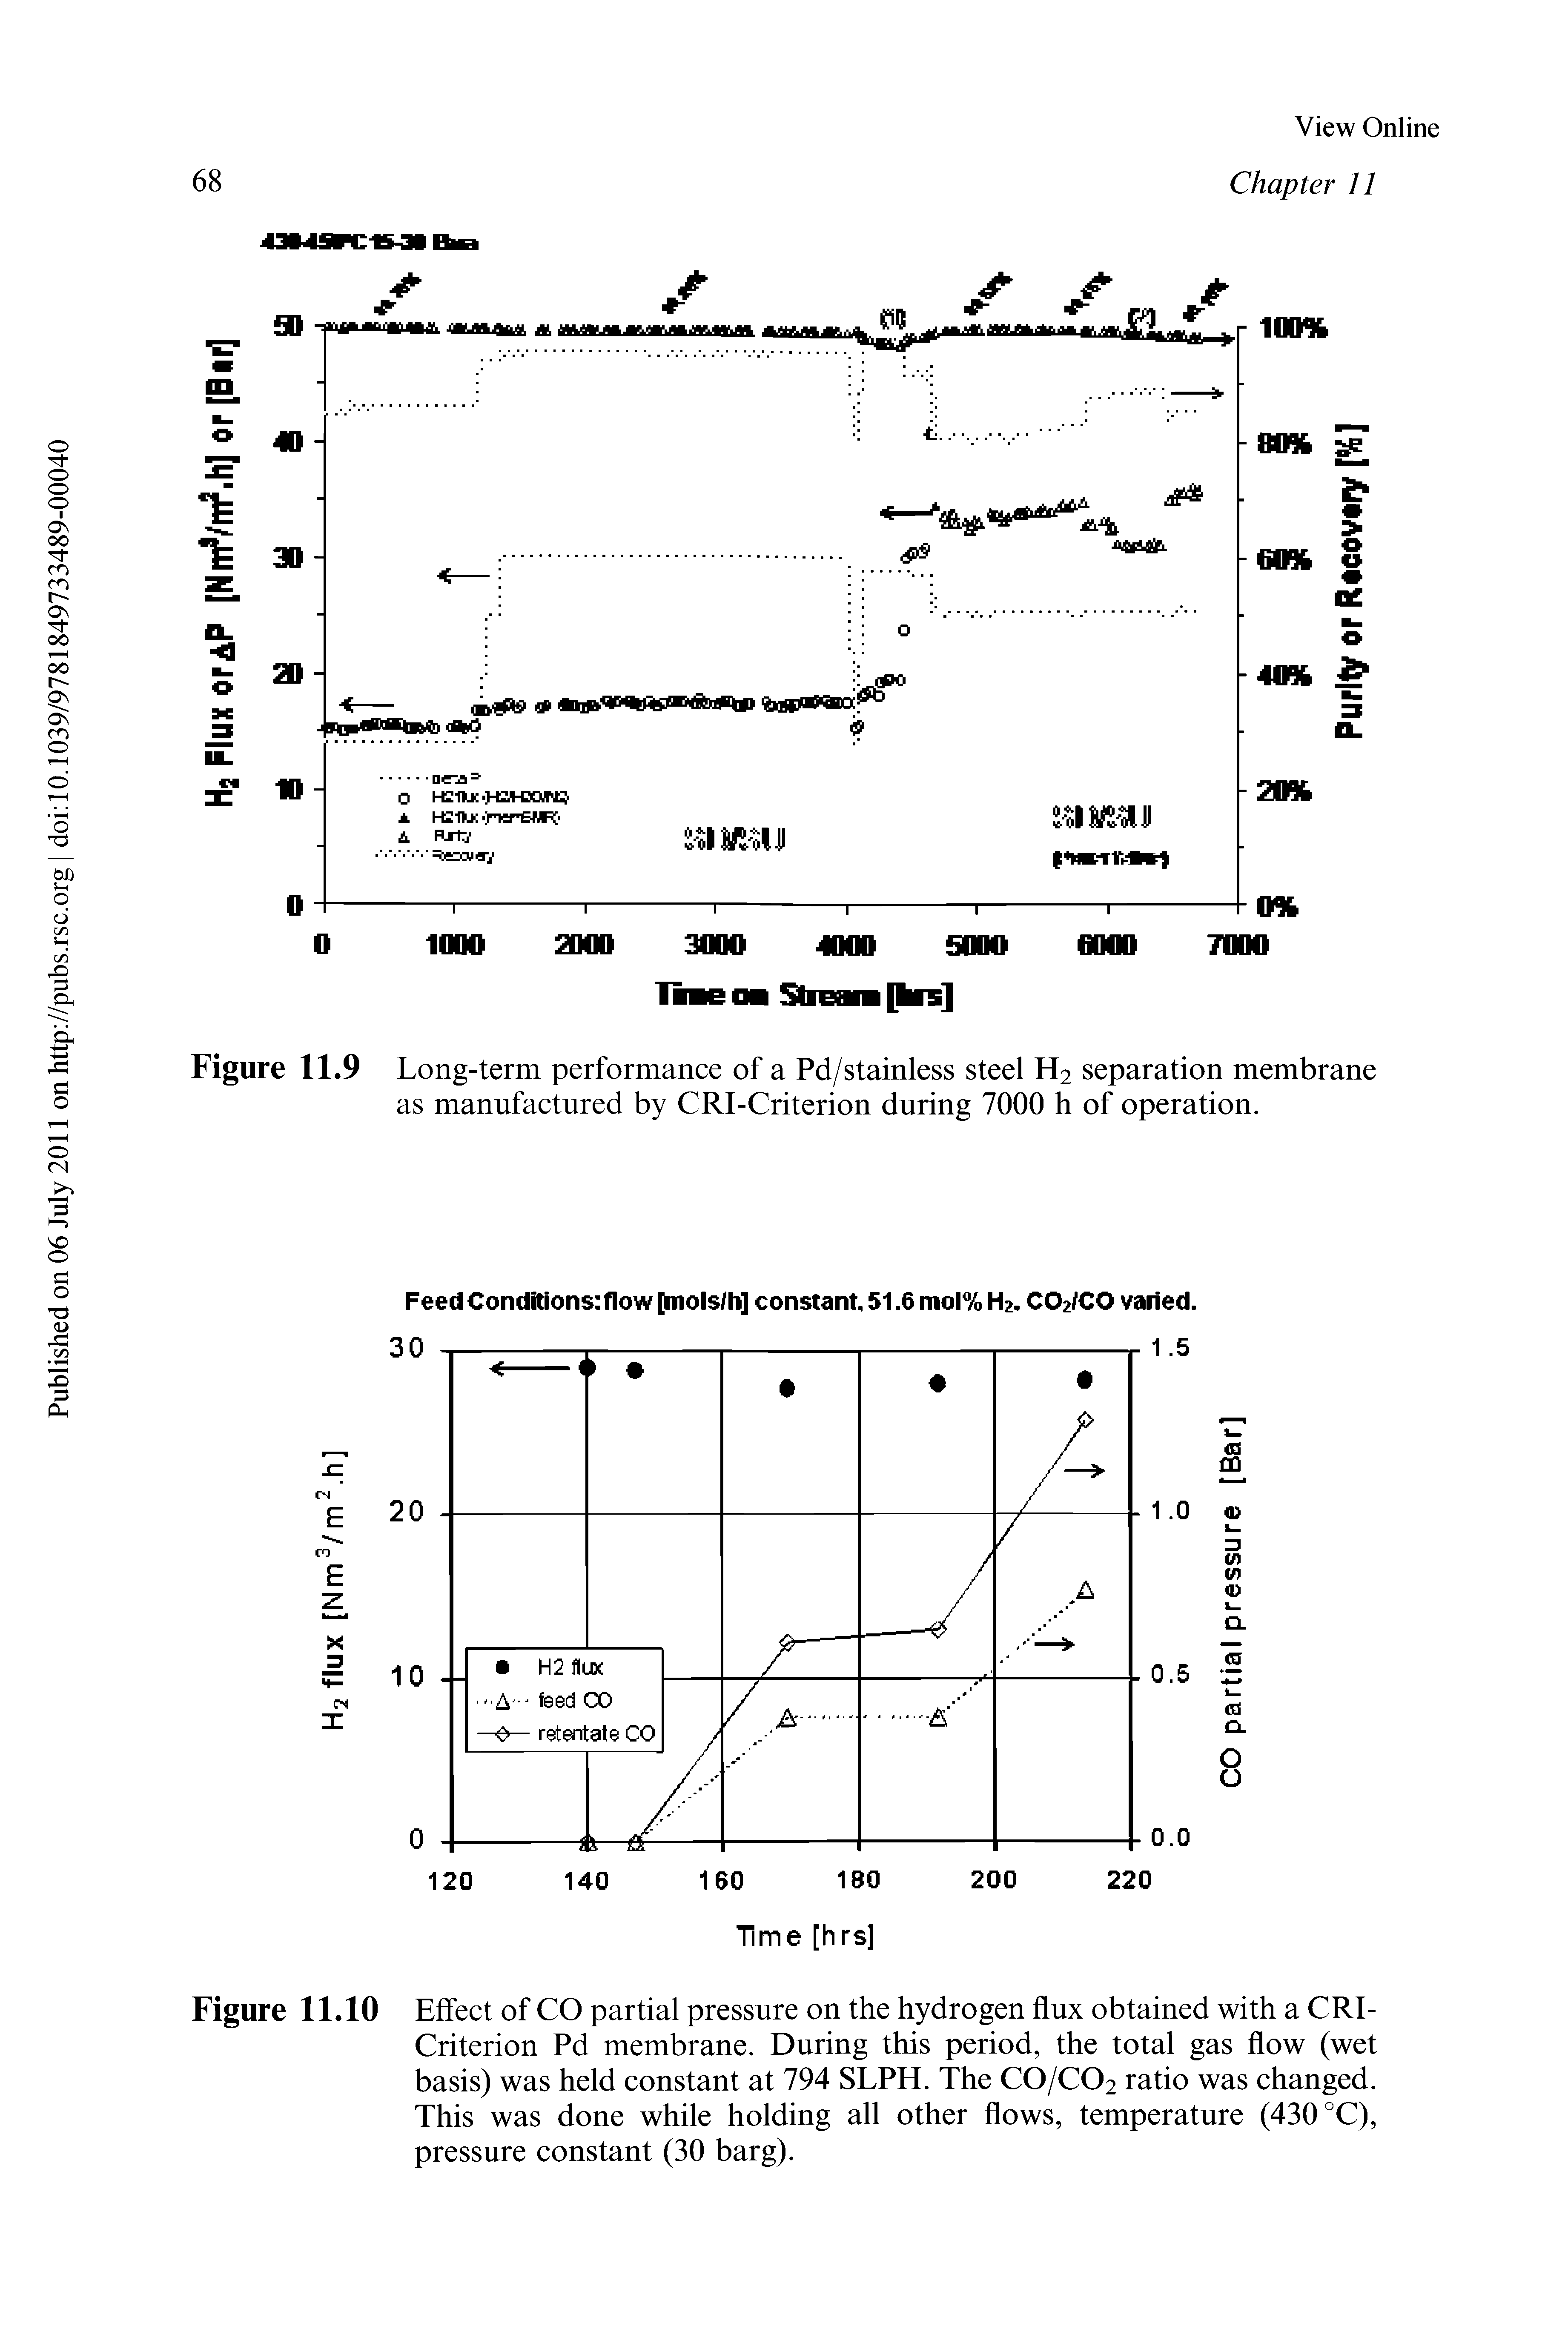 Figure 11.10 Effect of CO partial pressure on the hydrogen flux obtained with a CRI-Criterion Pd membrane. During this period, the total gas flow (wet basis) was held constant at 794 SLPH. The CO/CO2 ratio was changed. This was done while holding all other flows, temperature (430 °C), pressure constant (30 barg).